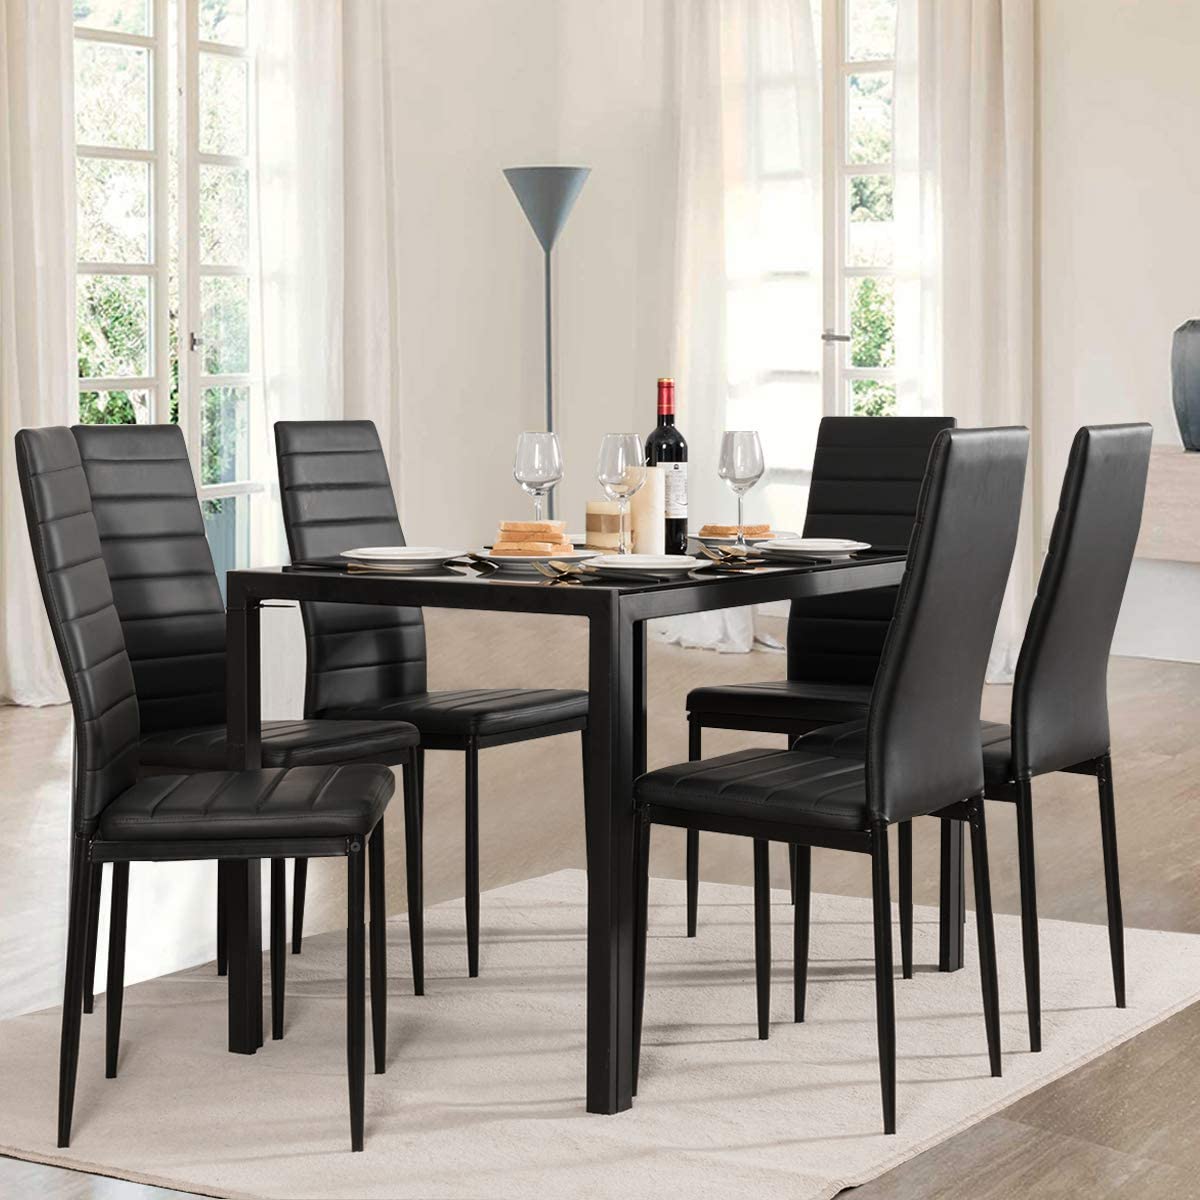 Giantex Kitchen Dining Table Set, Glass Tabletop Dining Room Set with Leather Padded 6 Chairs, Black